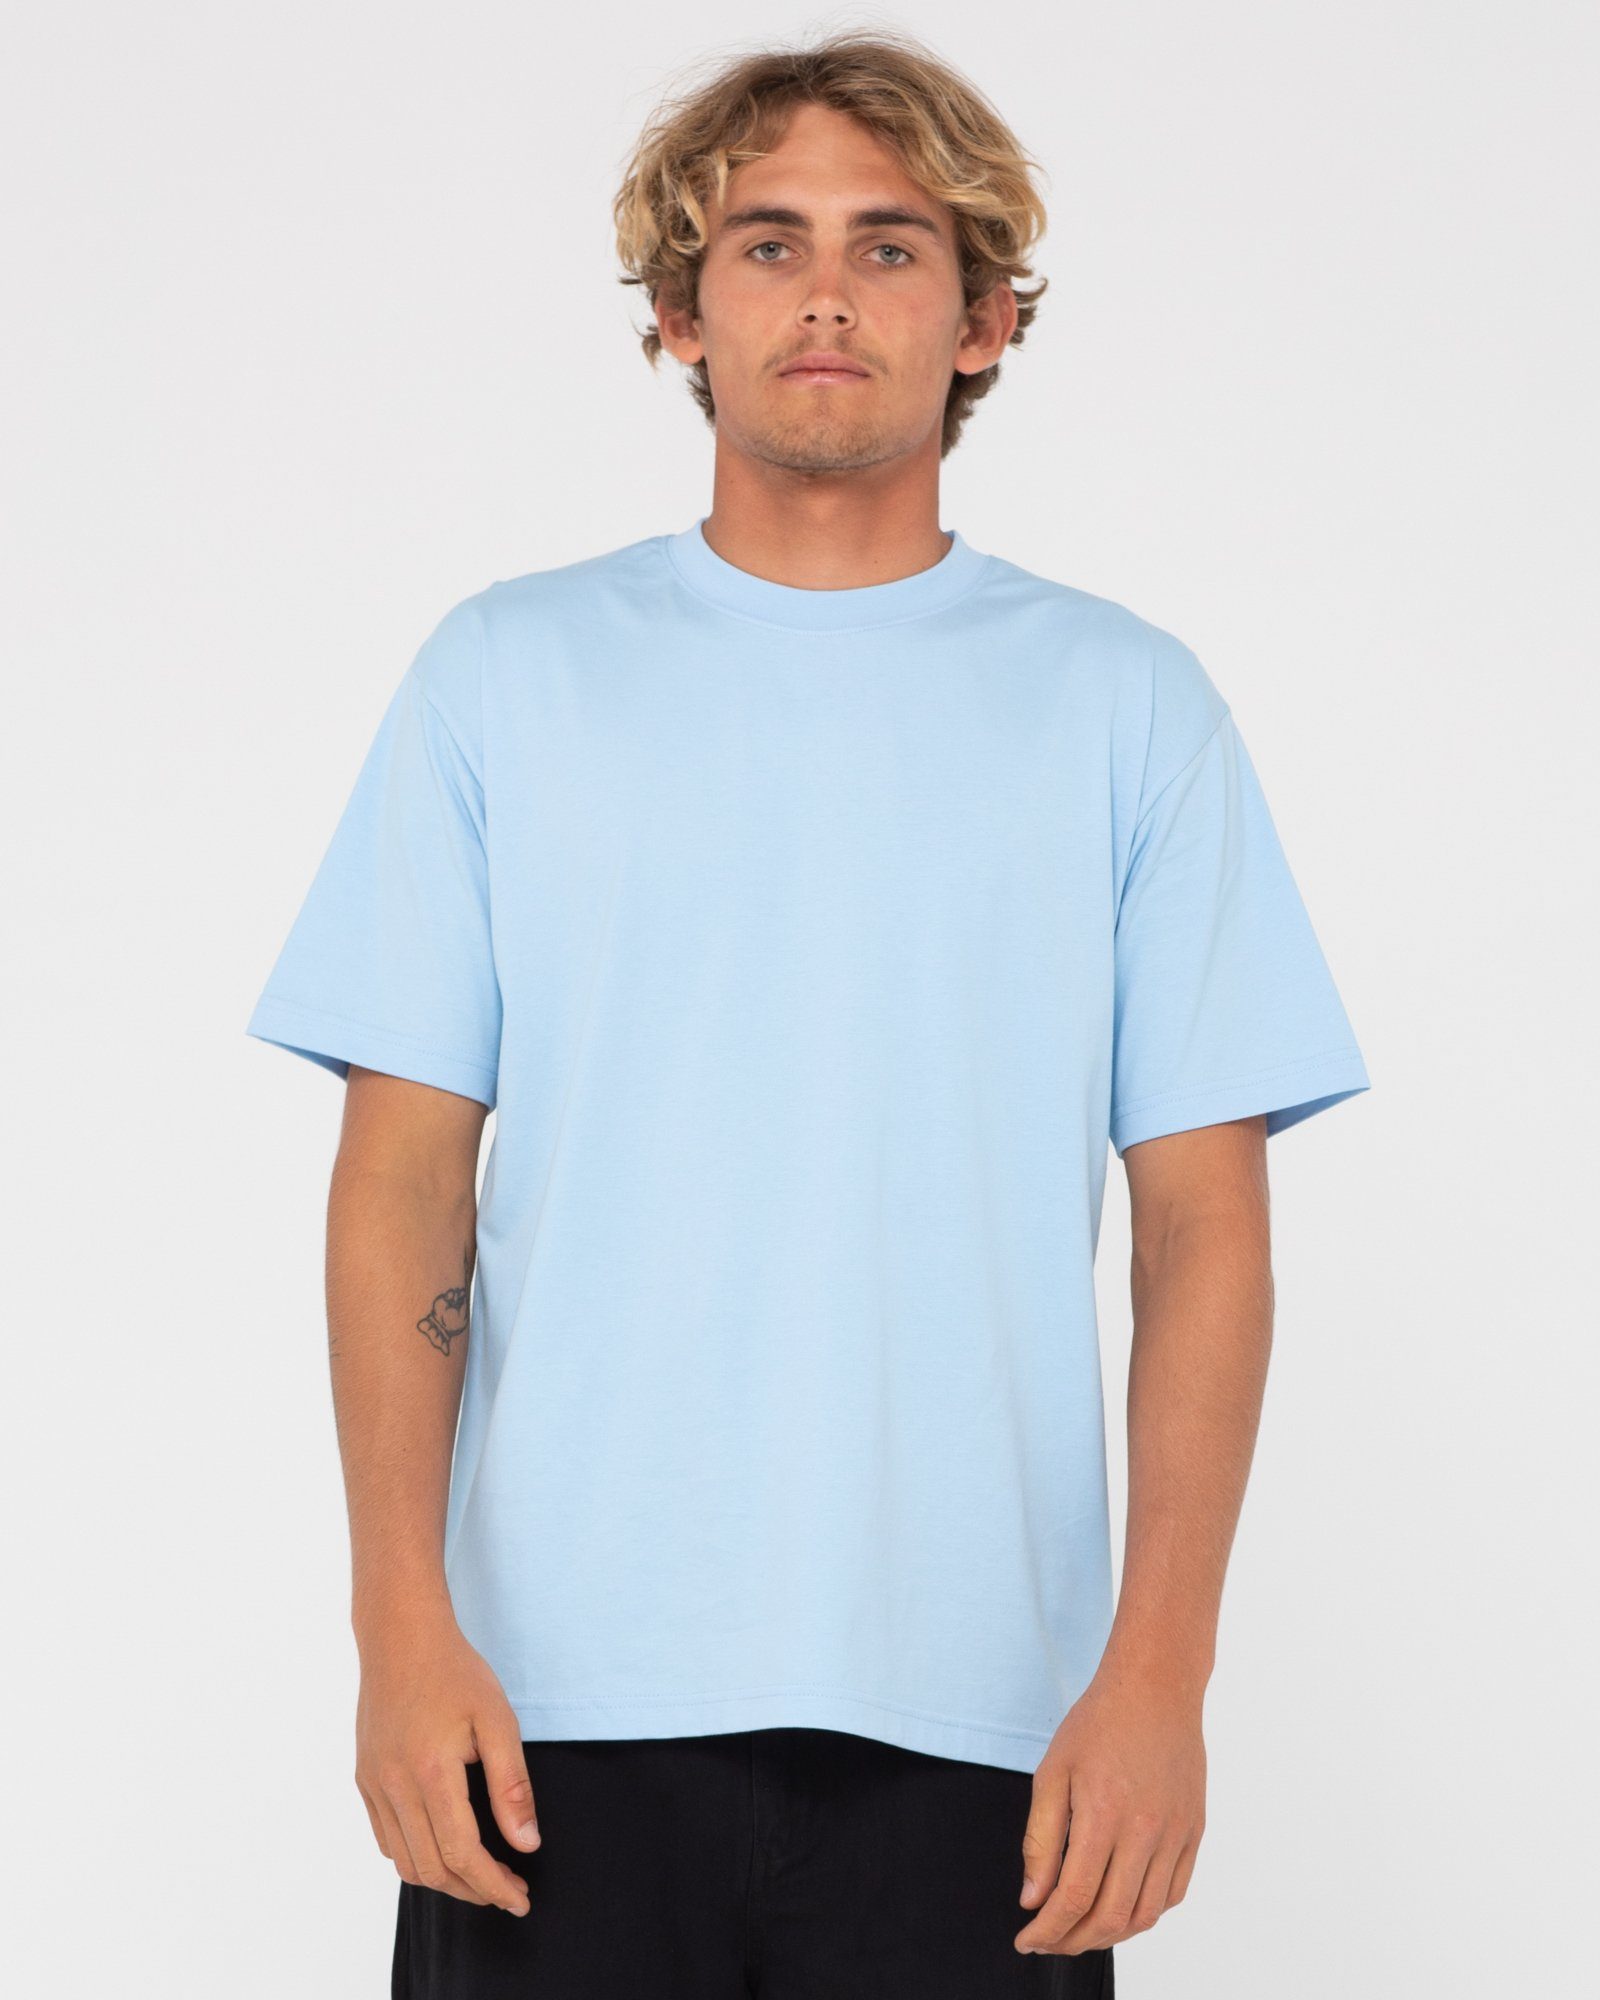 Rusty T-Shirt DELUXE BLANK S/S TEE PASTEL BLUE